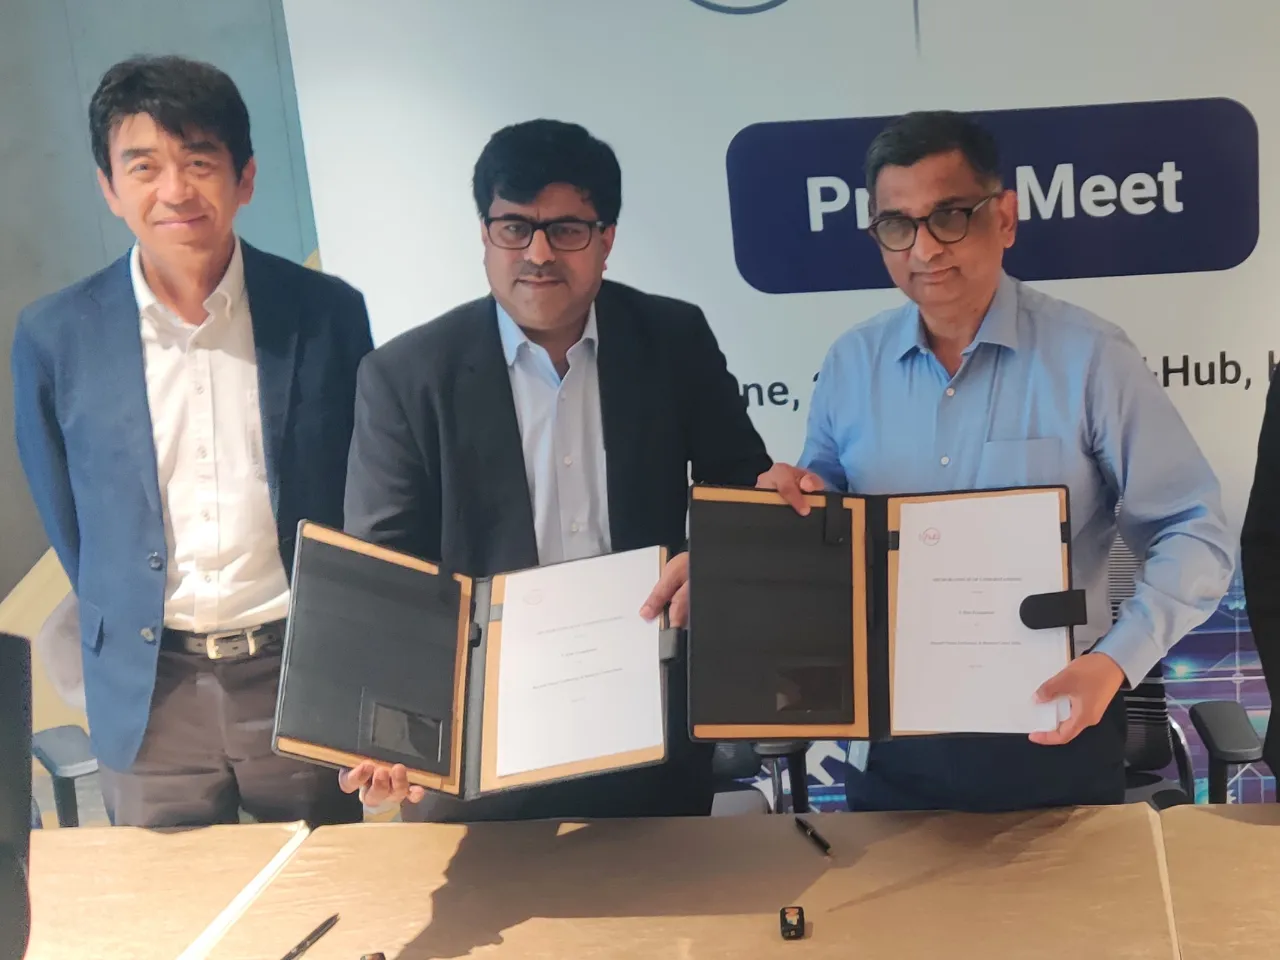 T-Hub partners with Renault Nissan Technology & Business Centre India (RNTBCI) to connect startups with industry experts